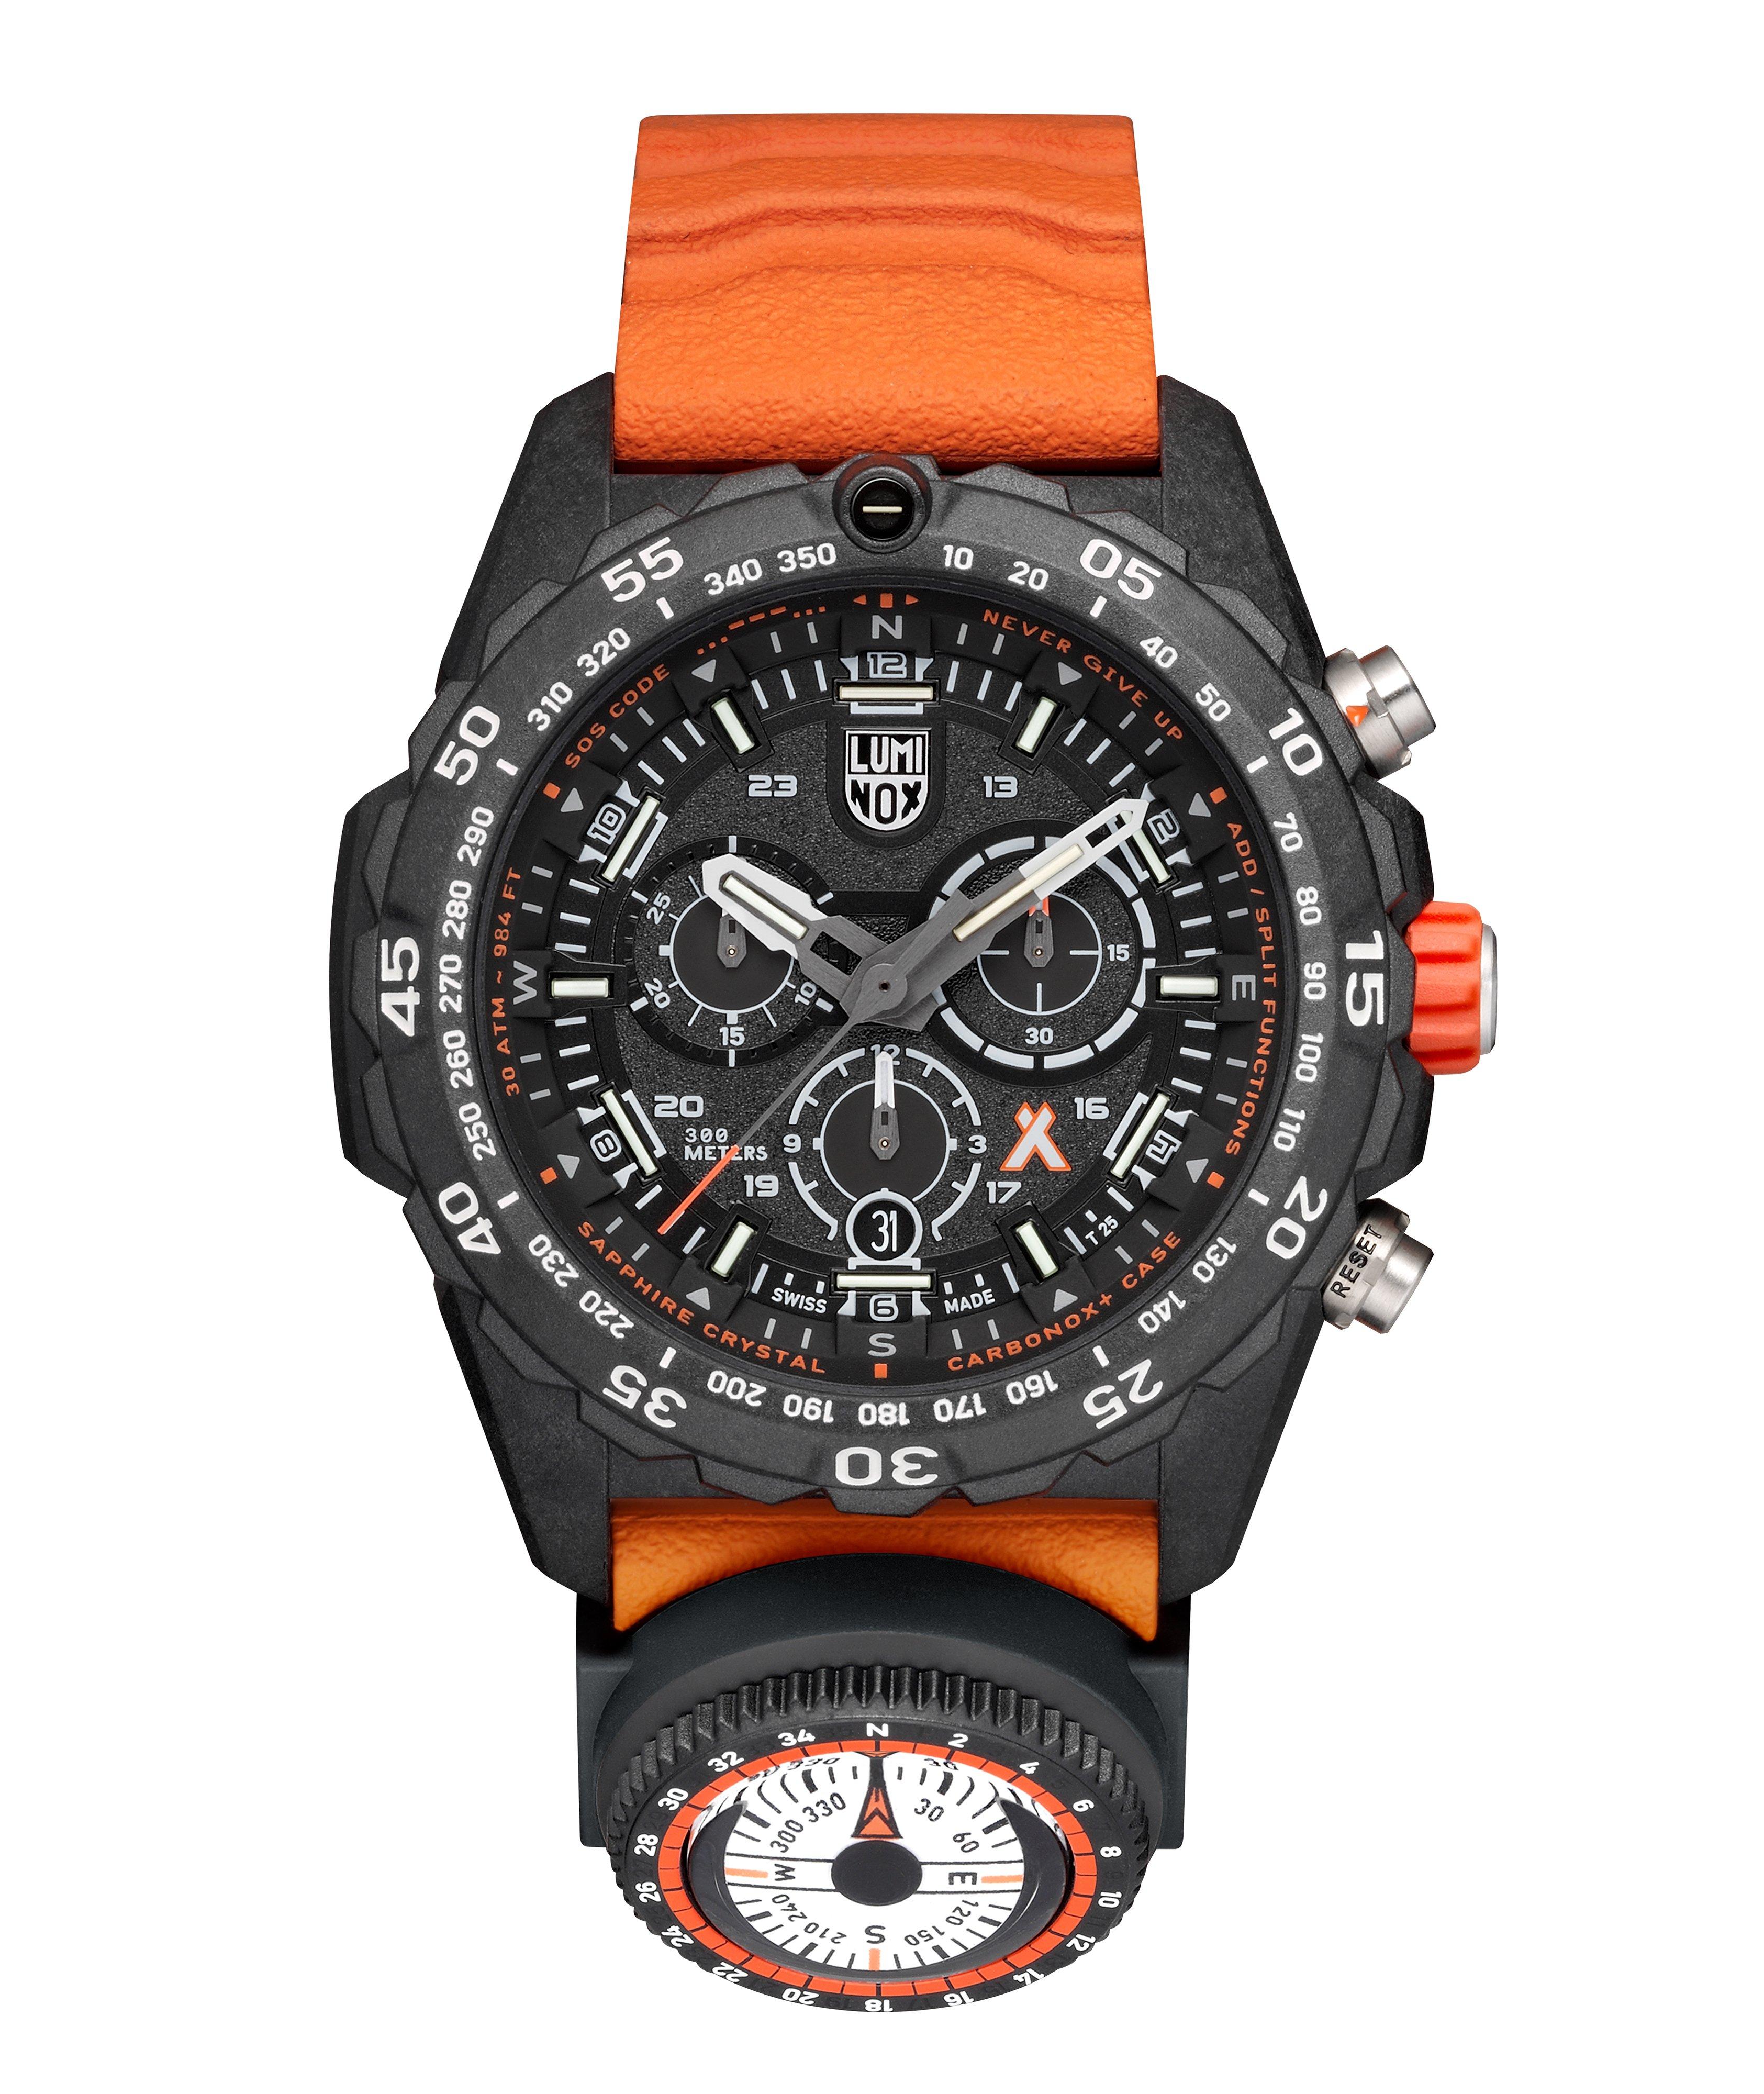 Montre Master 3749, collection Bear Grylls image 0